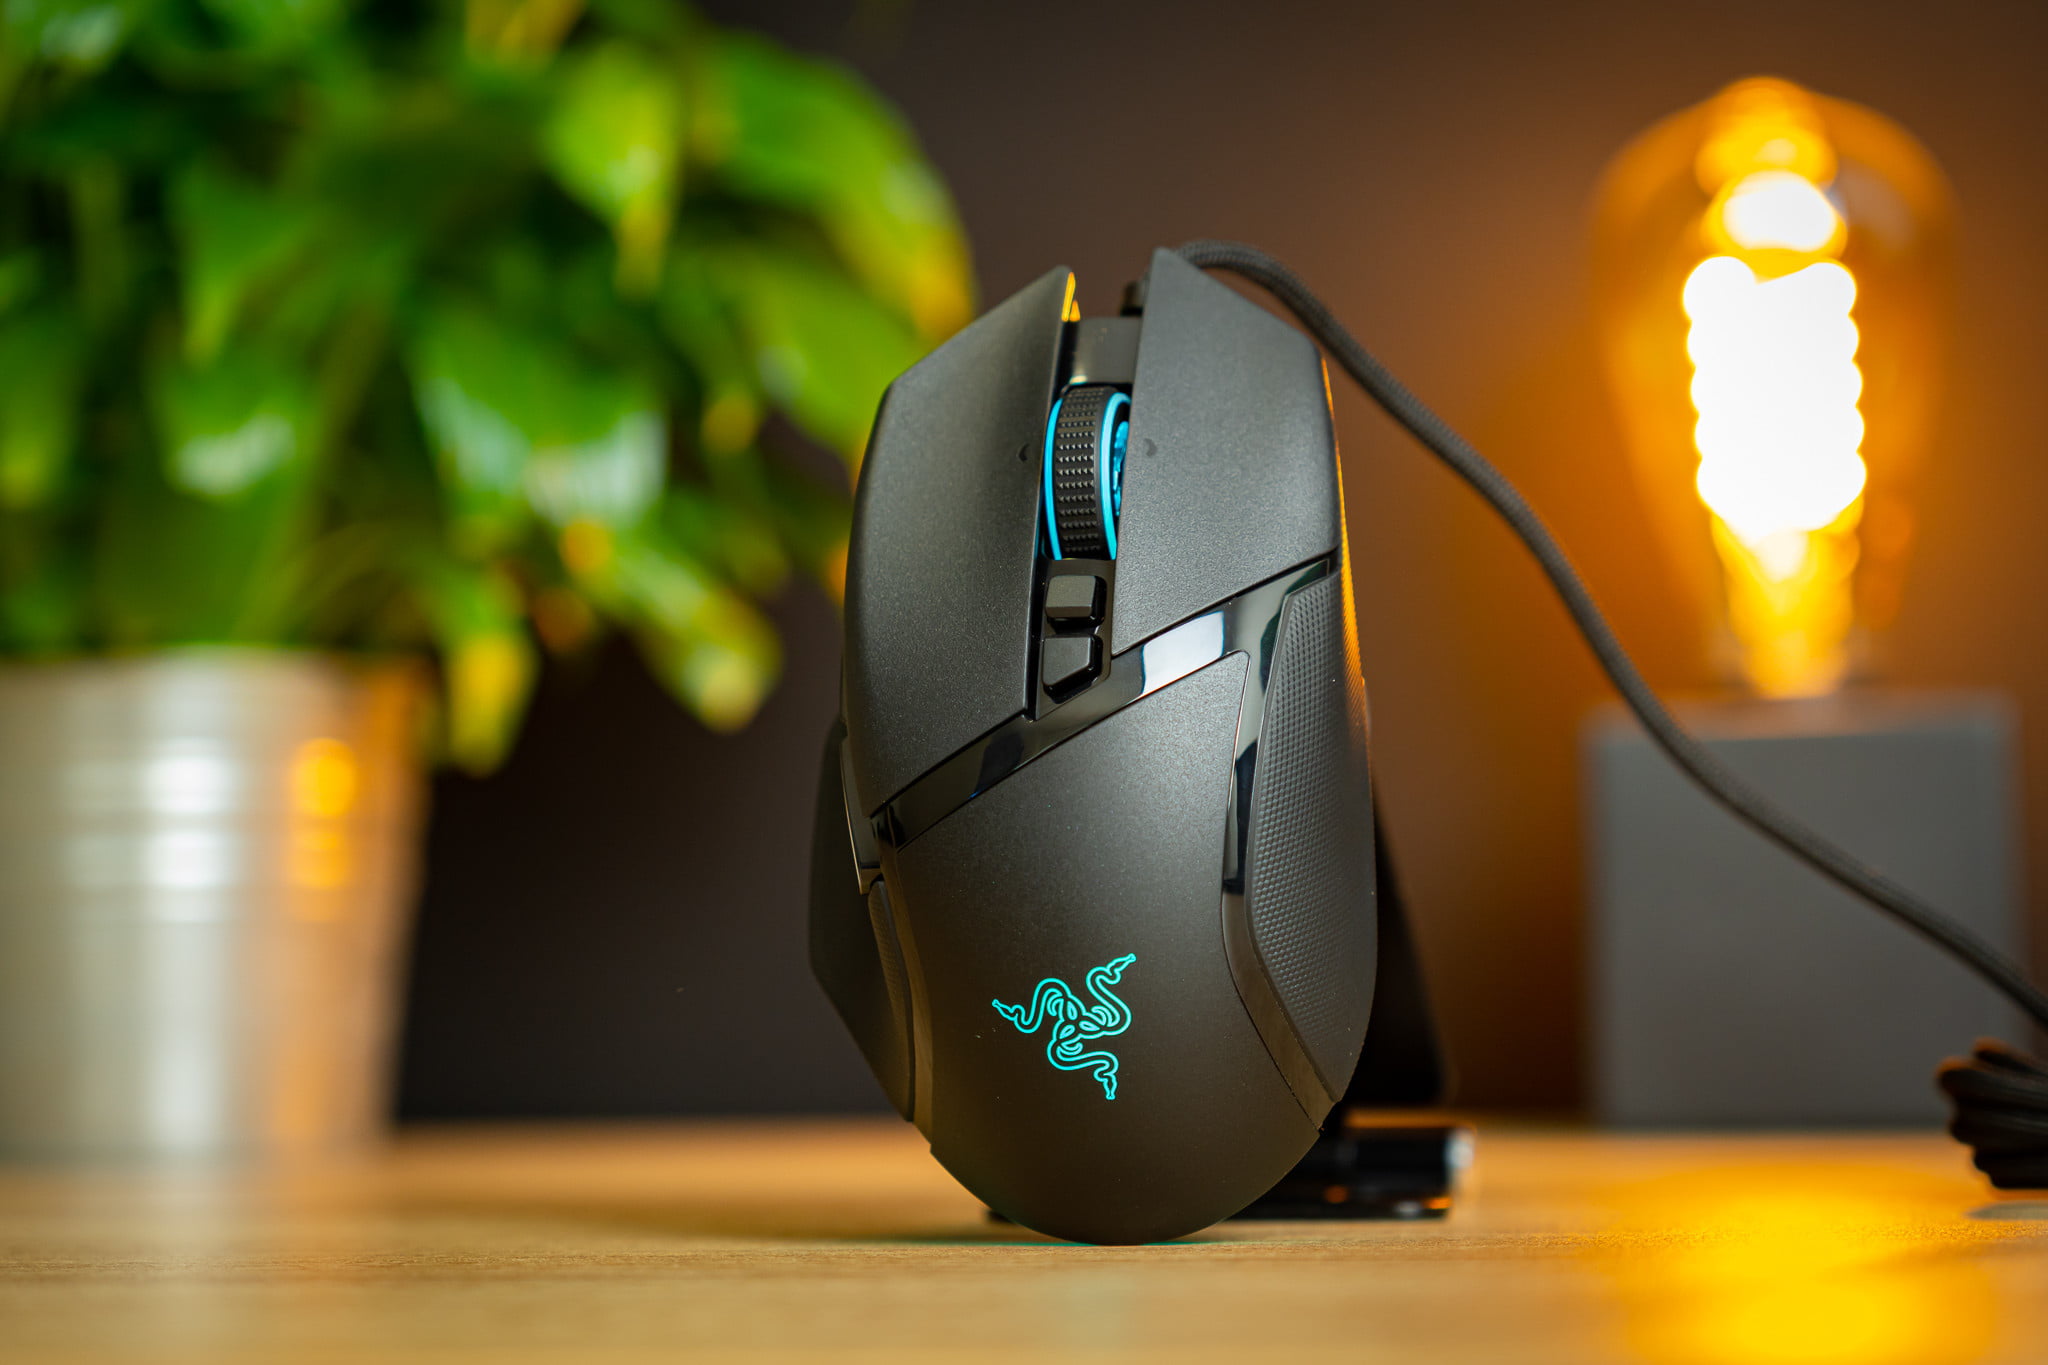 Razer’s new Basilisk V3 arrives with more features, like a LEDs and brilliant scroll wheel